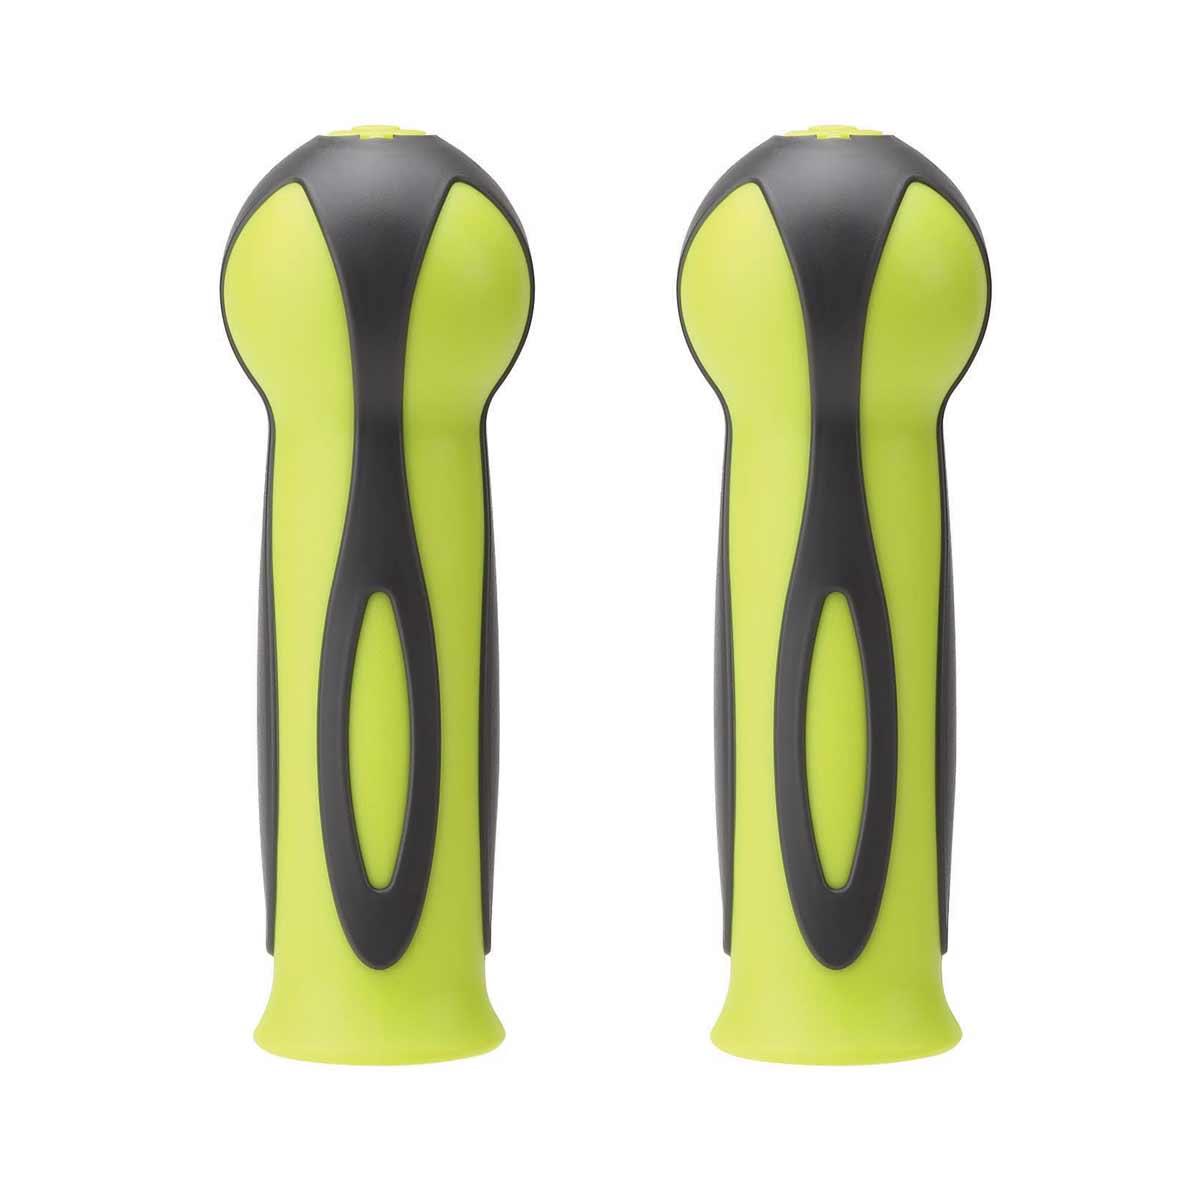 Spare parts: Scooter Handlebar Grips - green - MoonyBoon